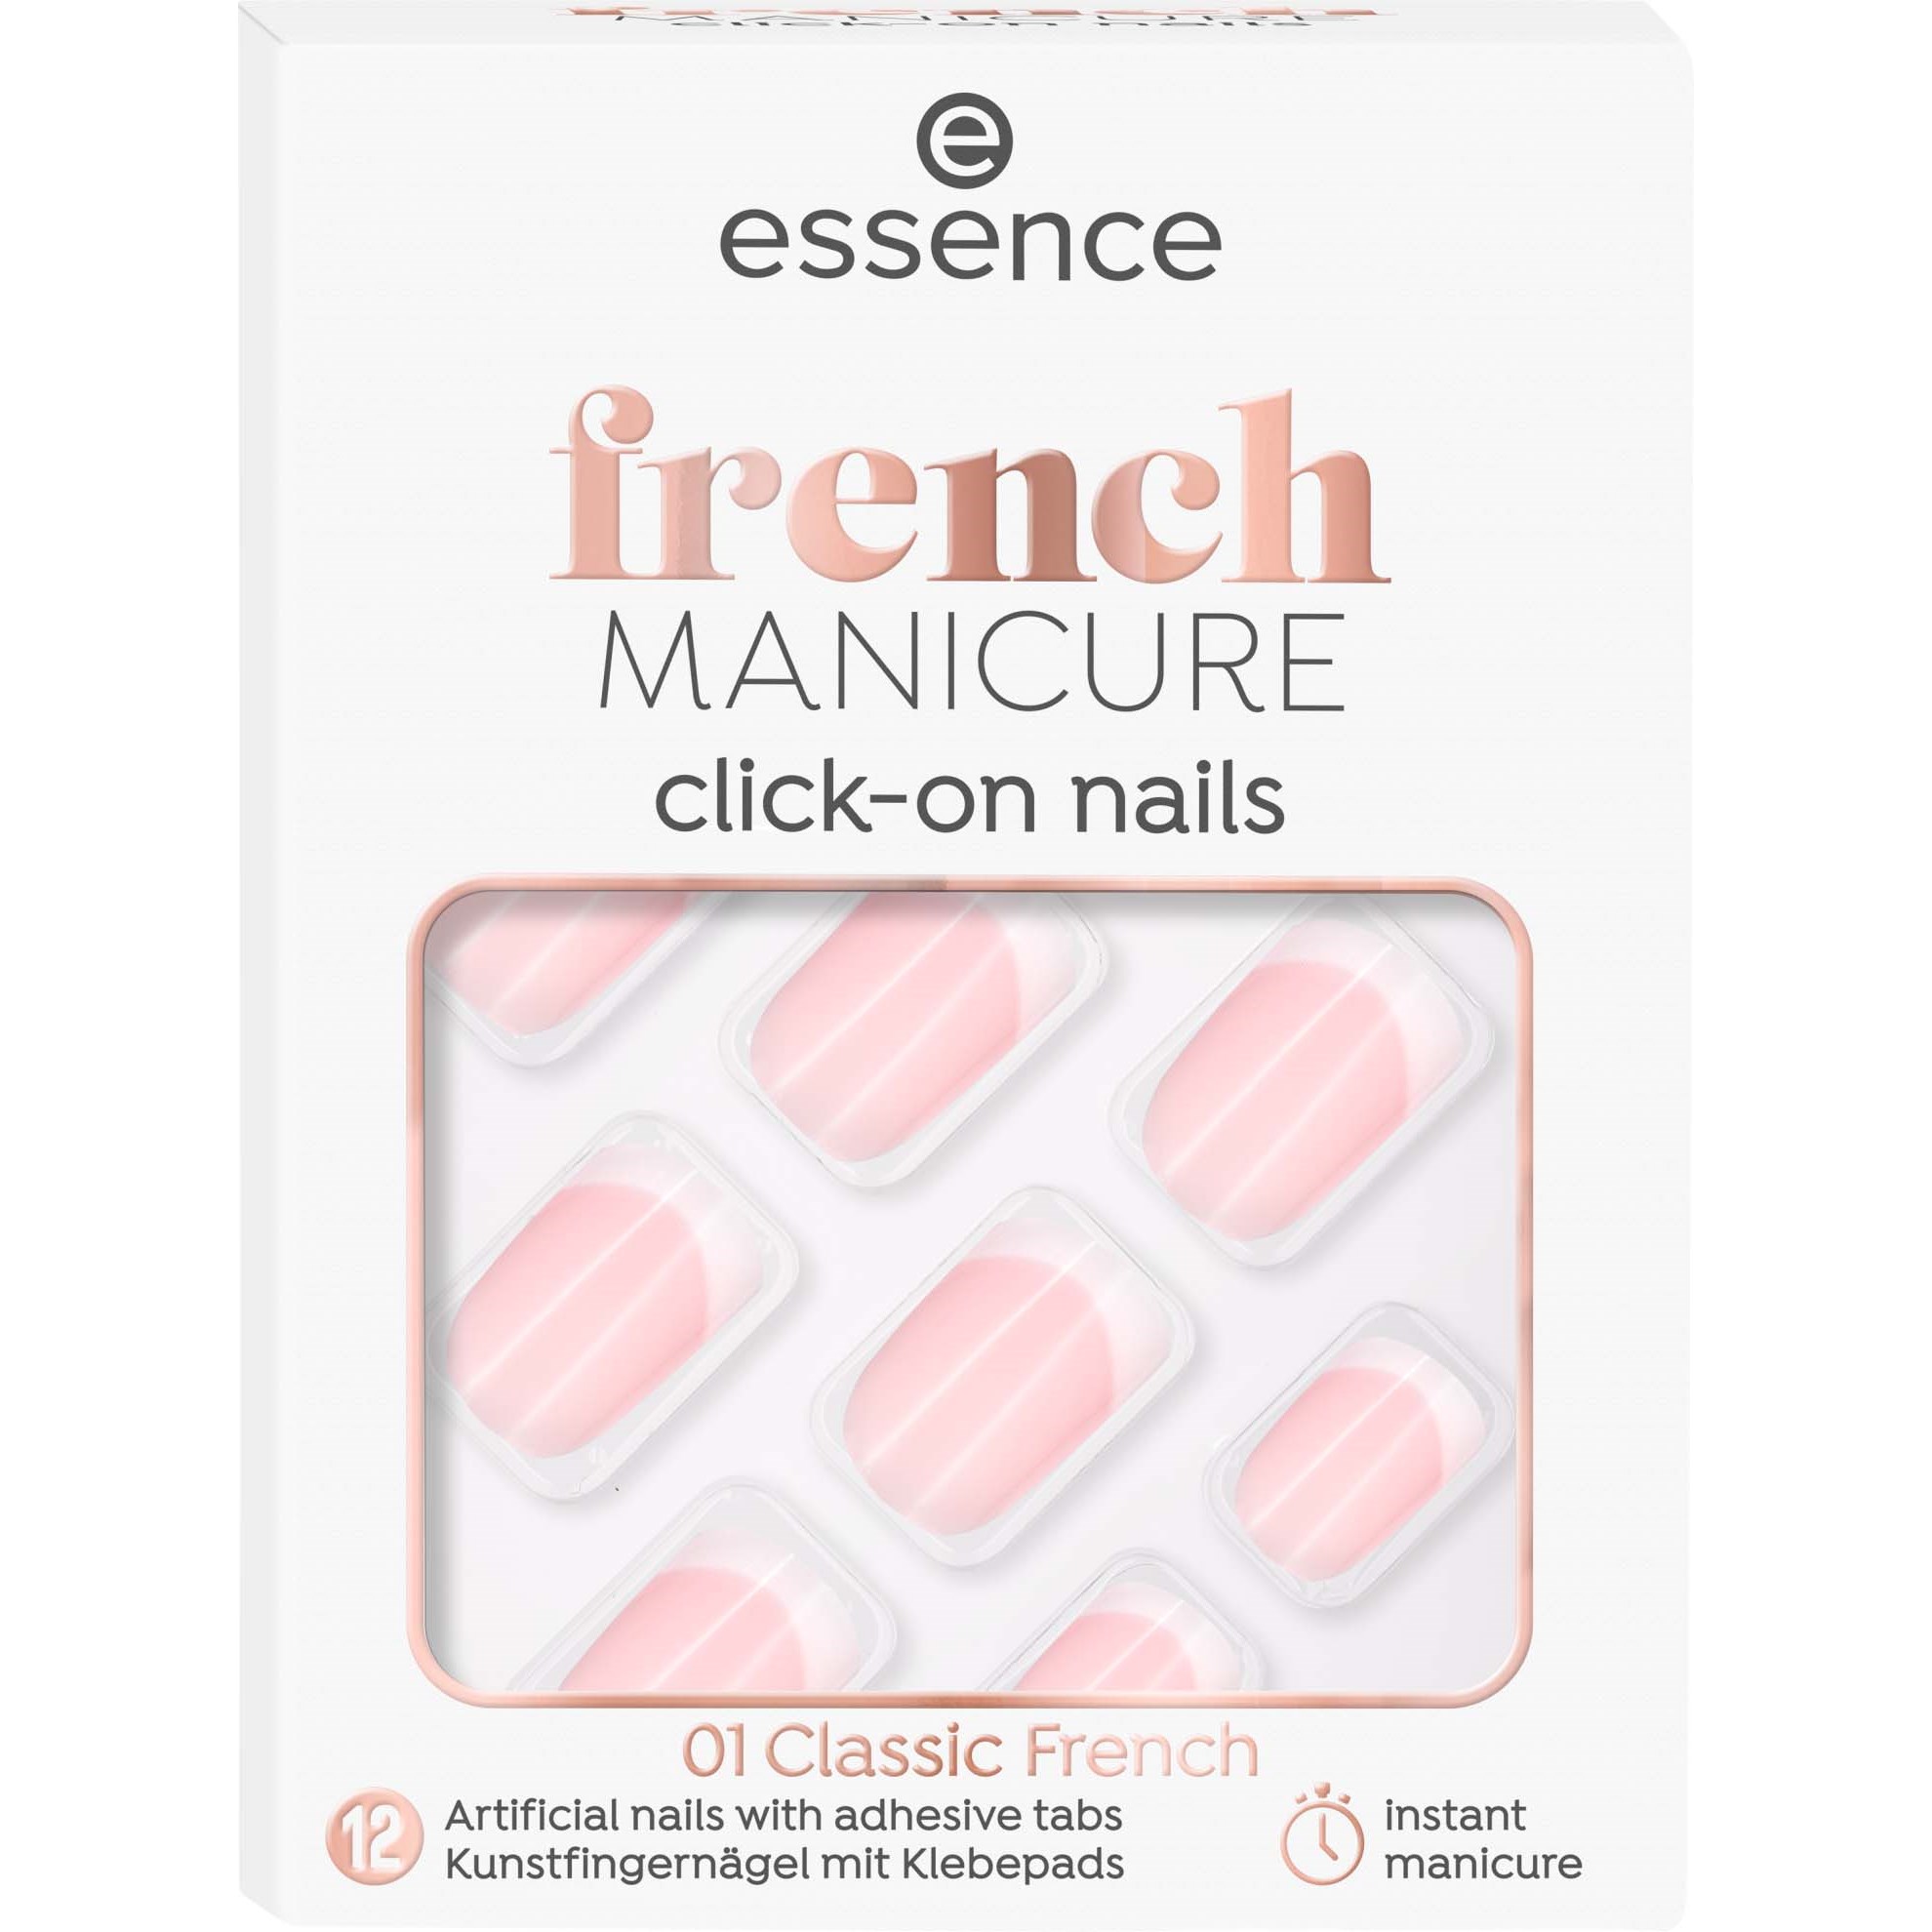 essence French Manicure Click-on Nails 01 Classic French